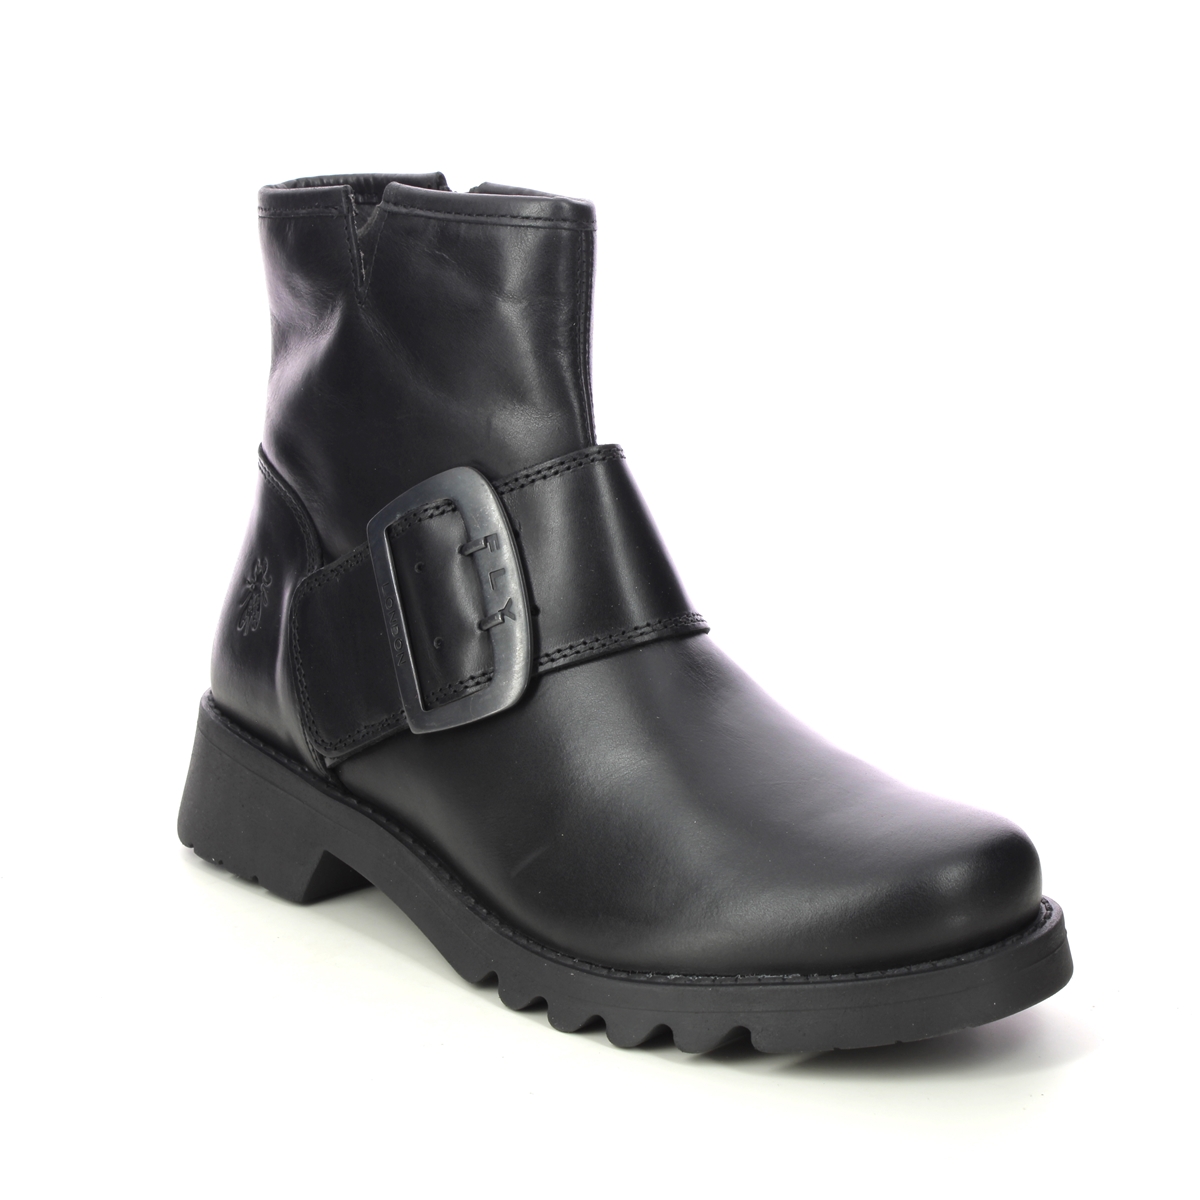 Fly London Rily   Ronin Black Leather Womens Ankle Boots P144991 In Size 42 In Plain Black Leather